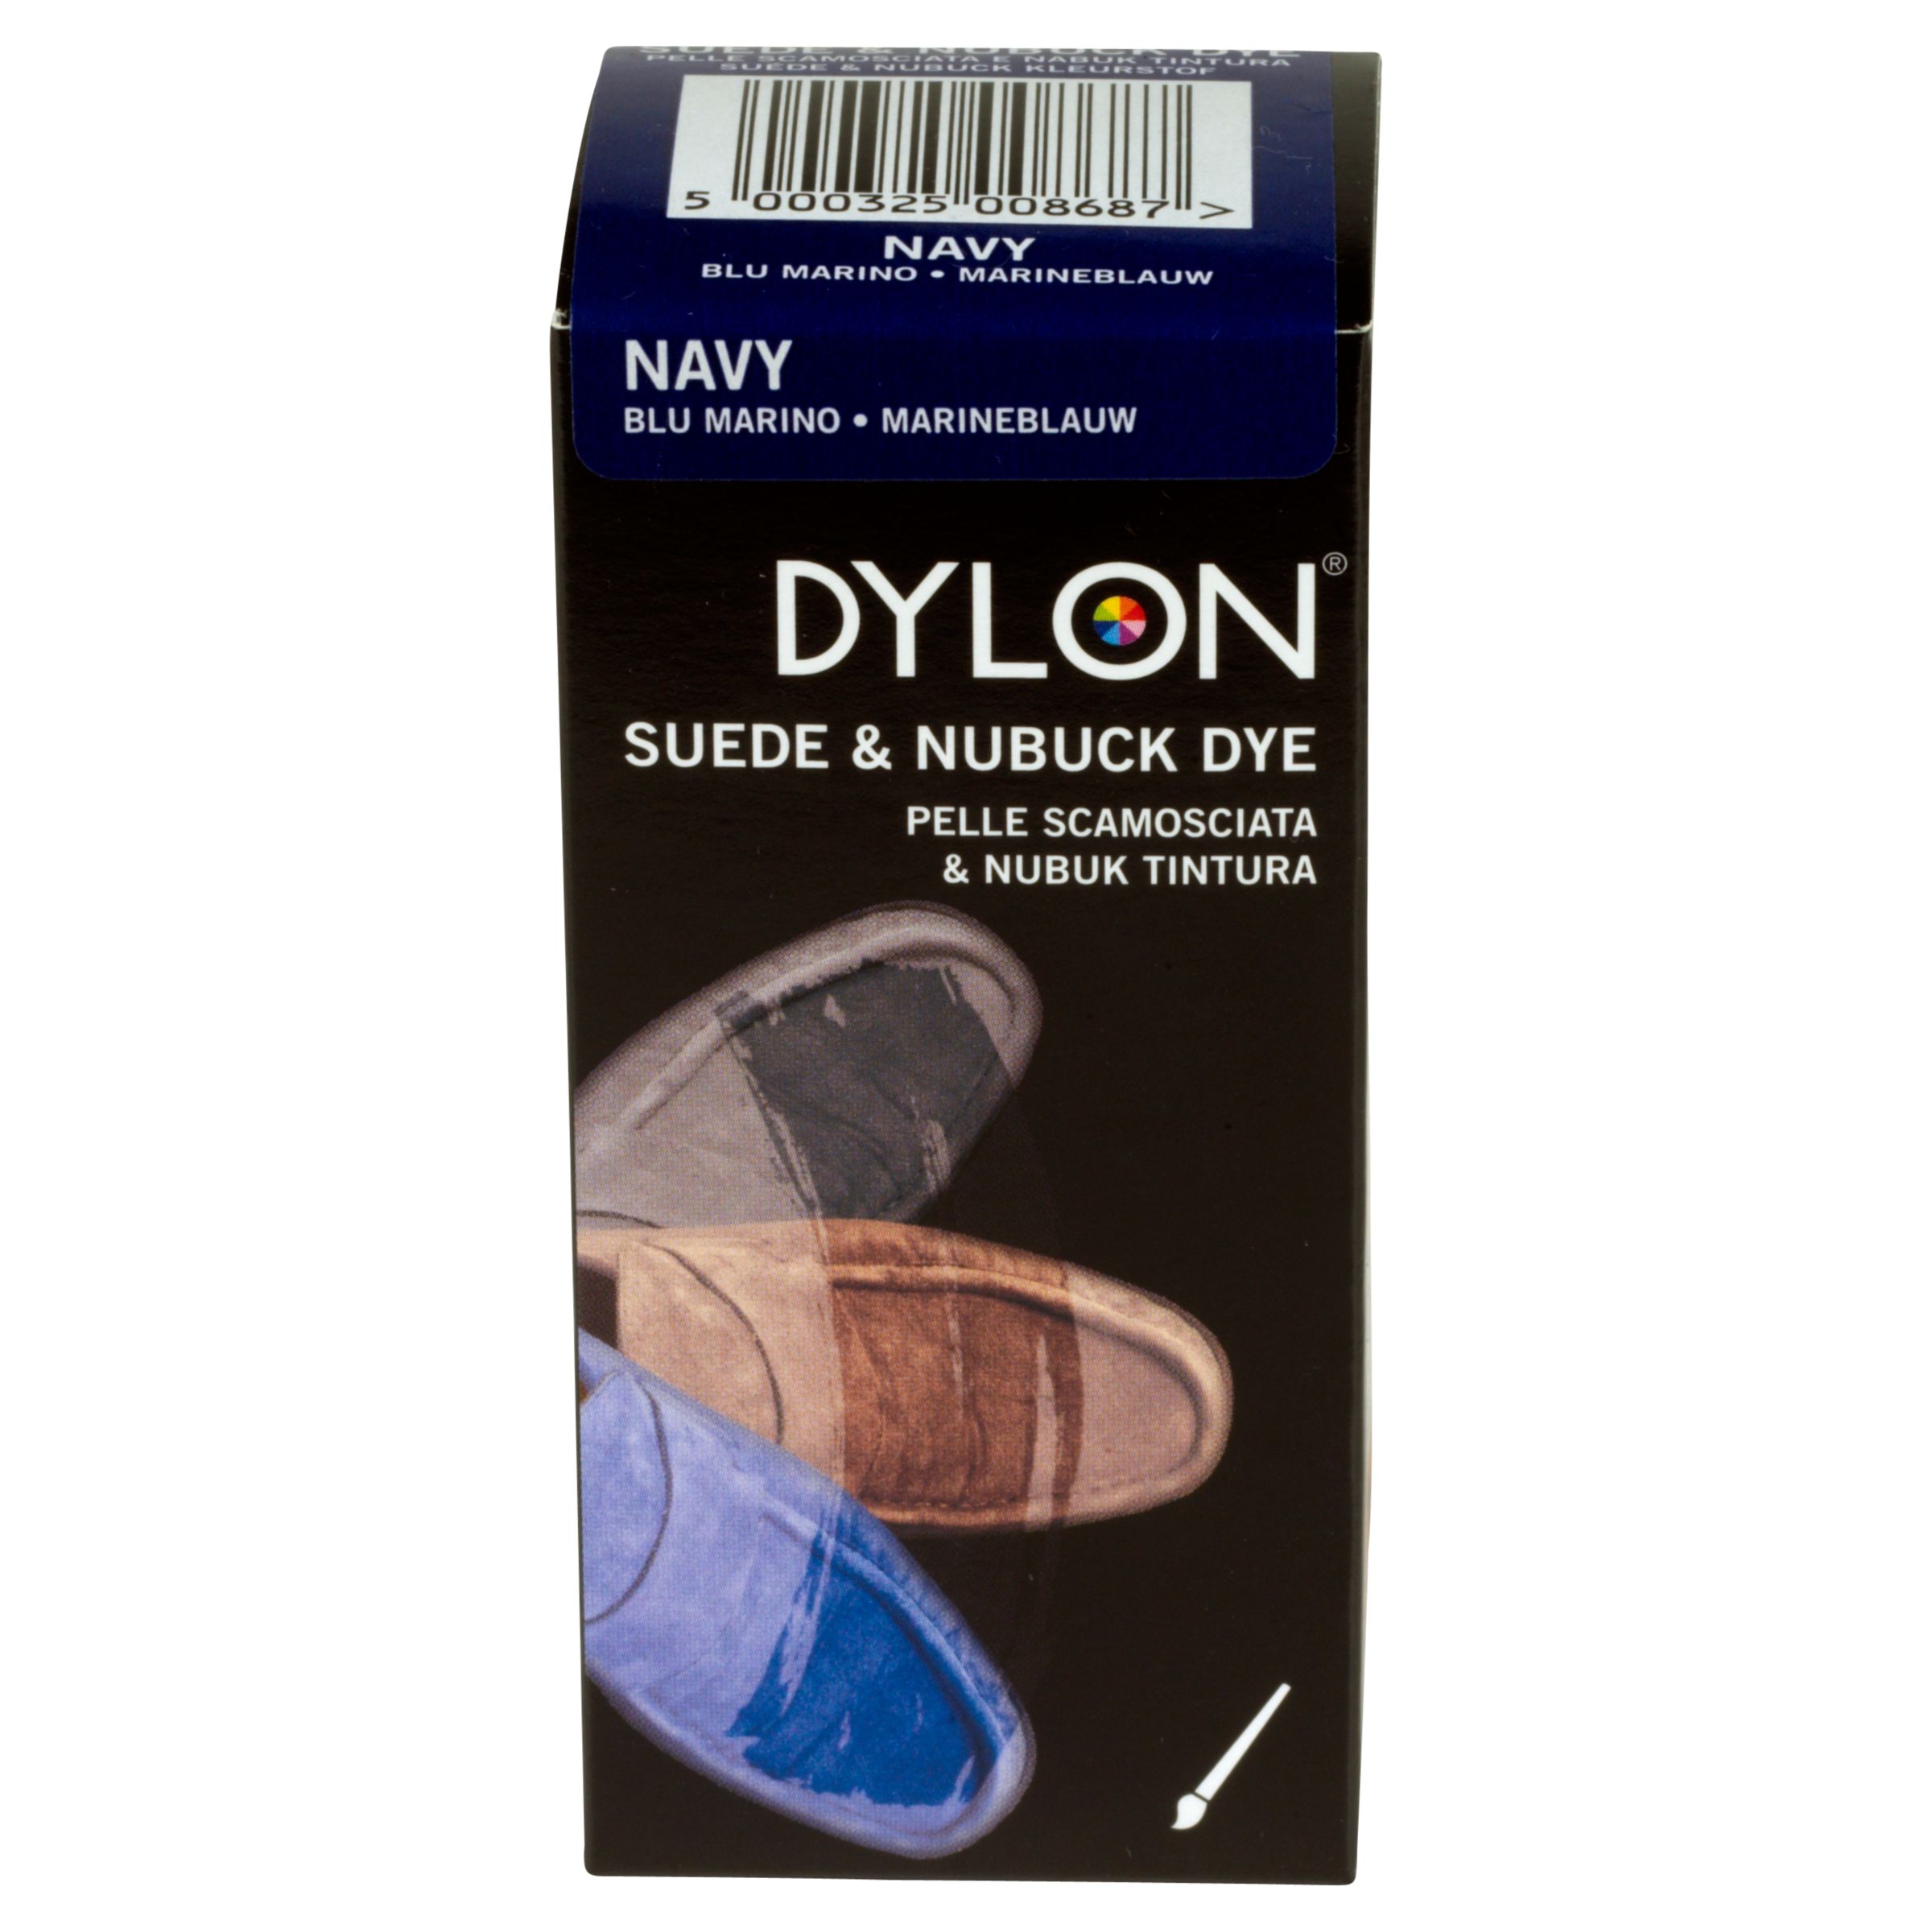 Dark Grey Suede Dye - best suede shoe dye for suede shoes and boots